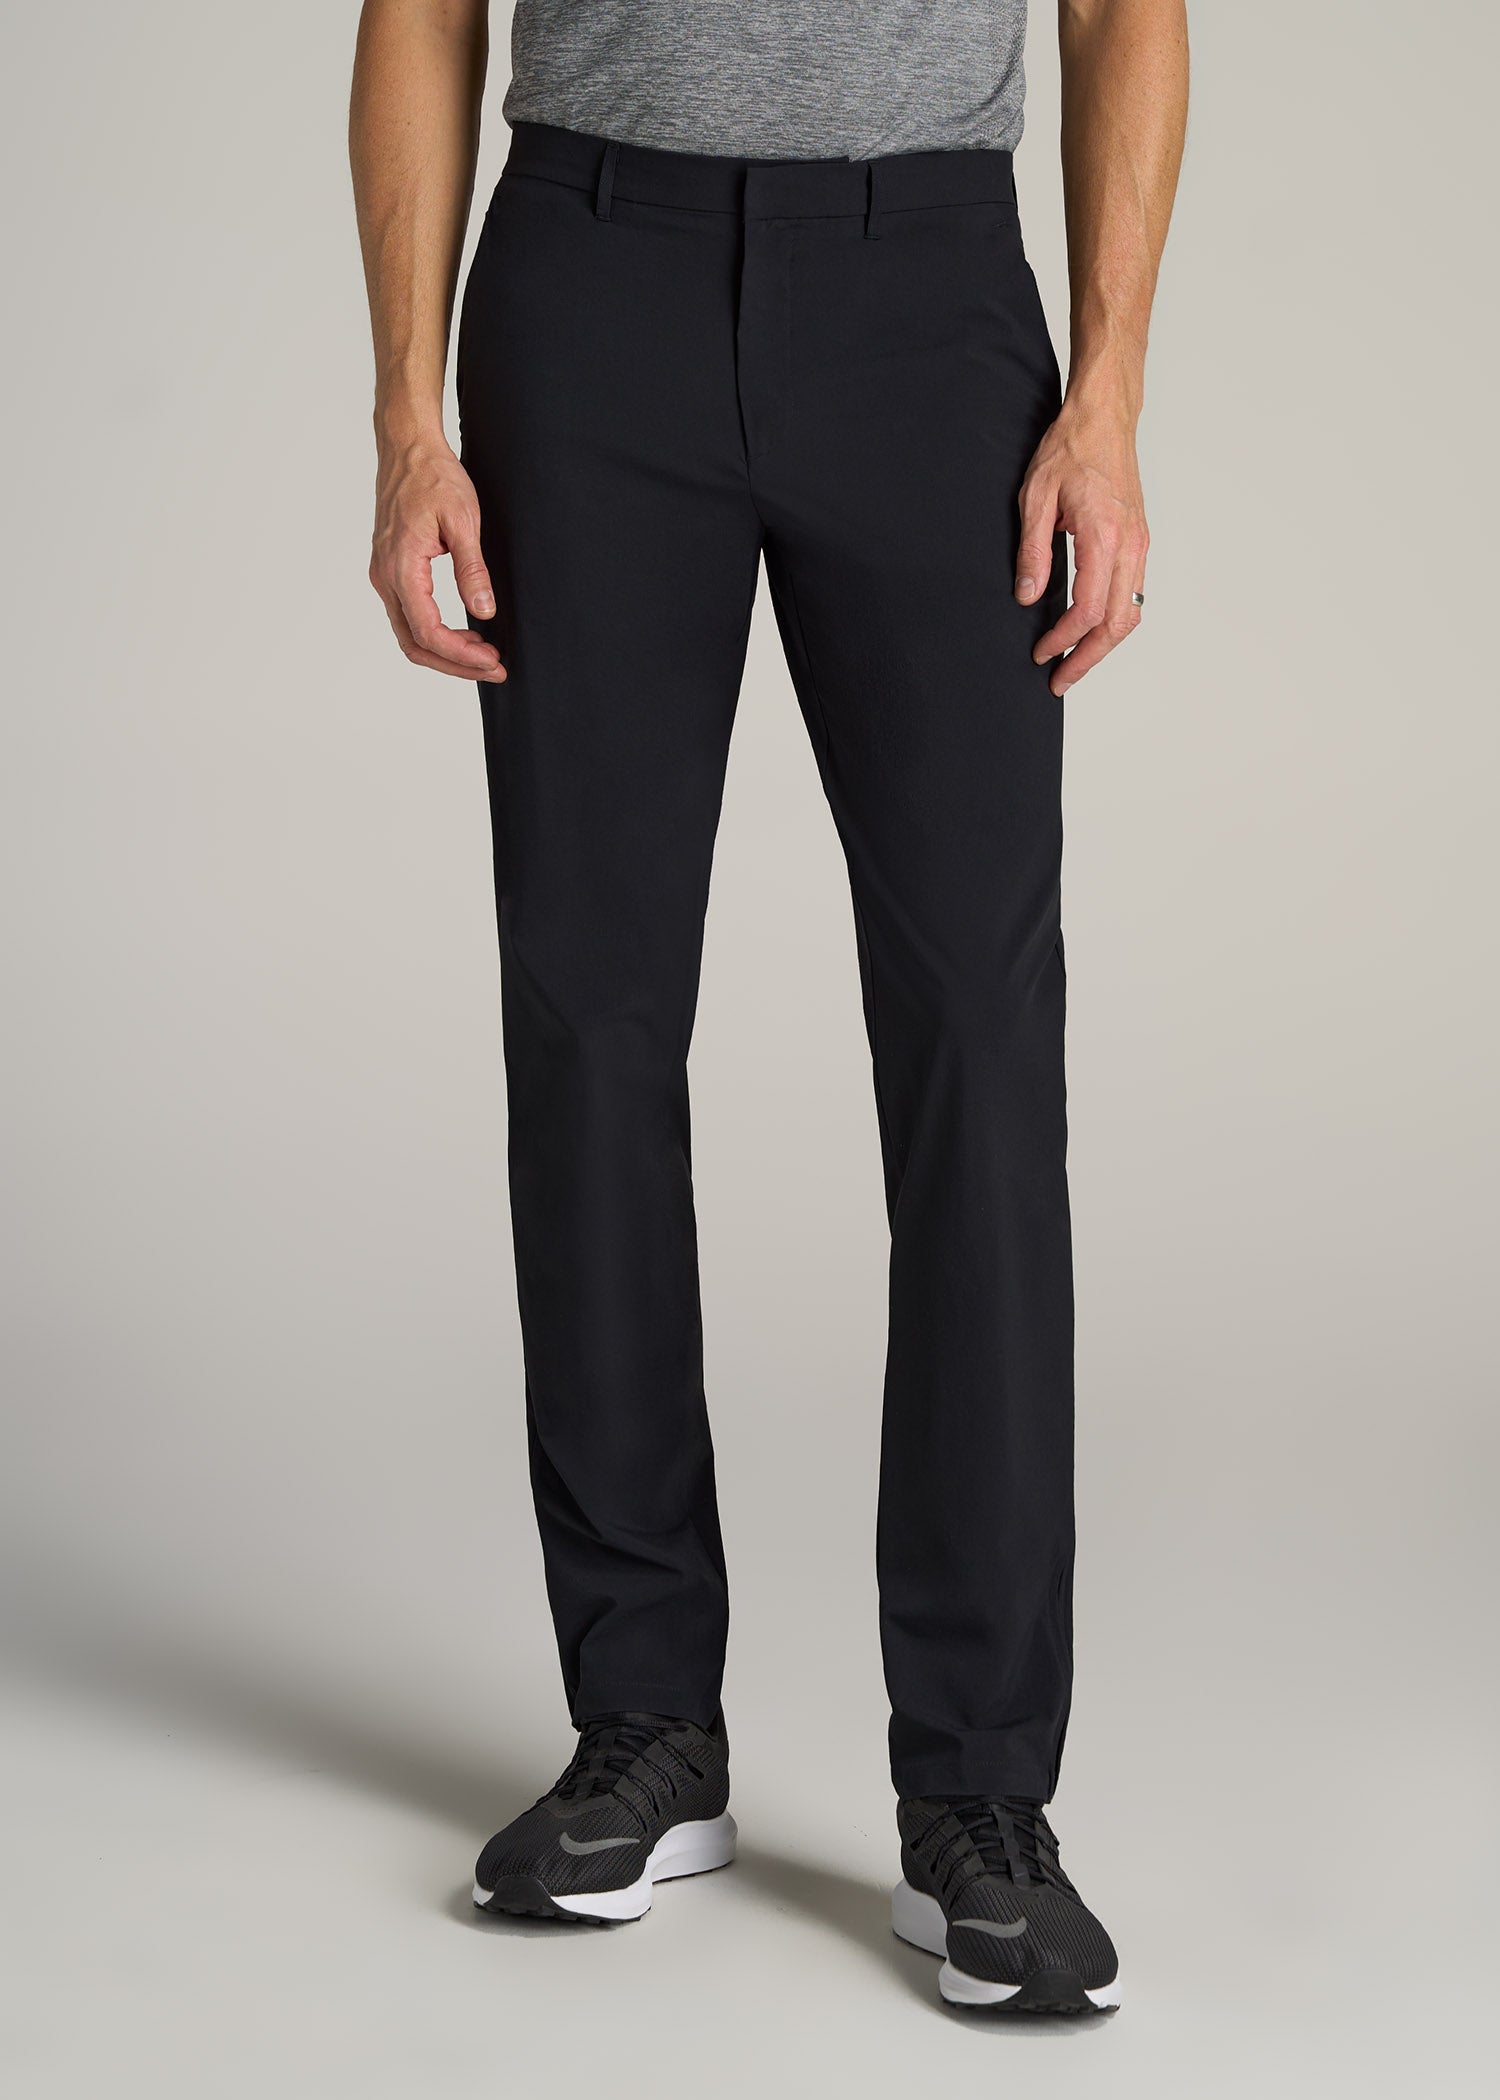 Performance TAPERED-FIT Chino Pants for Tall Men in Black